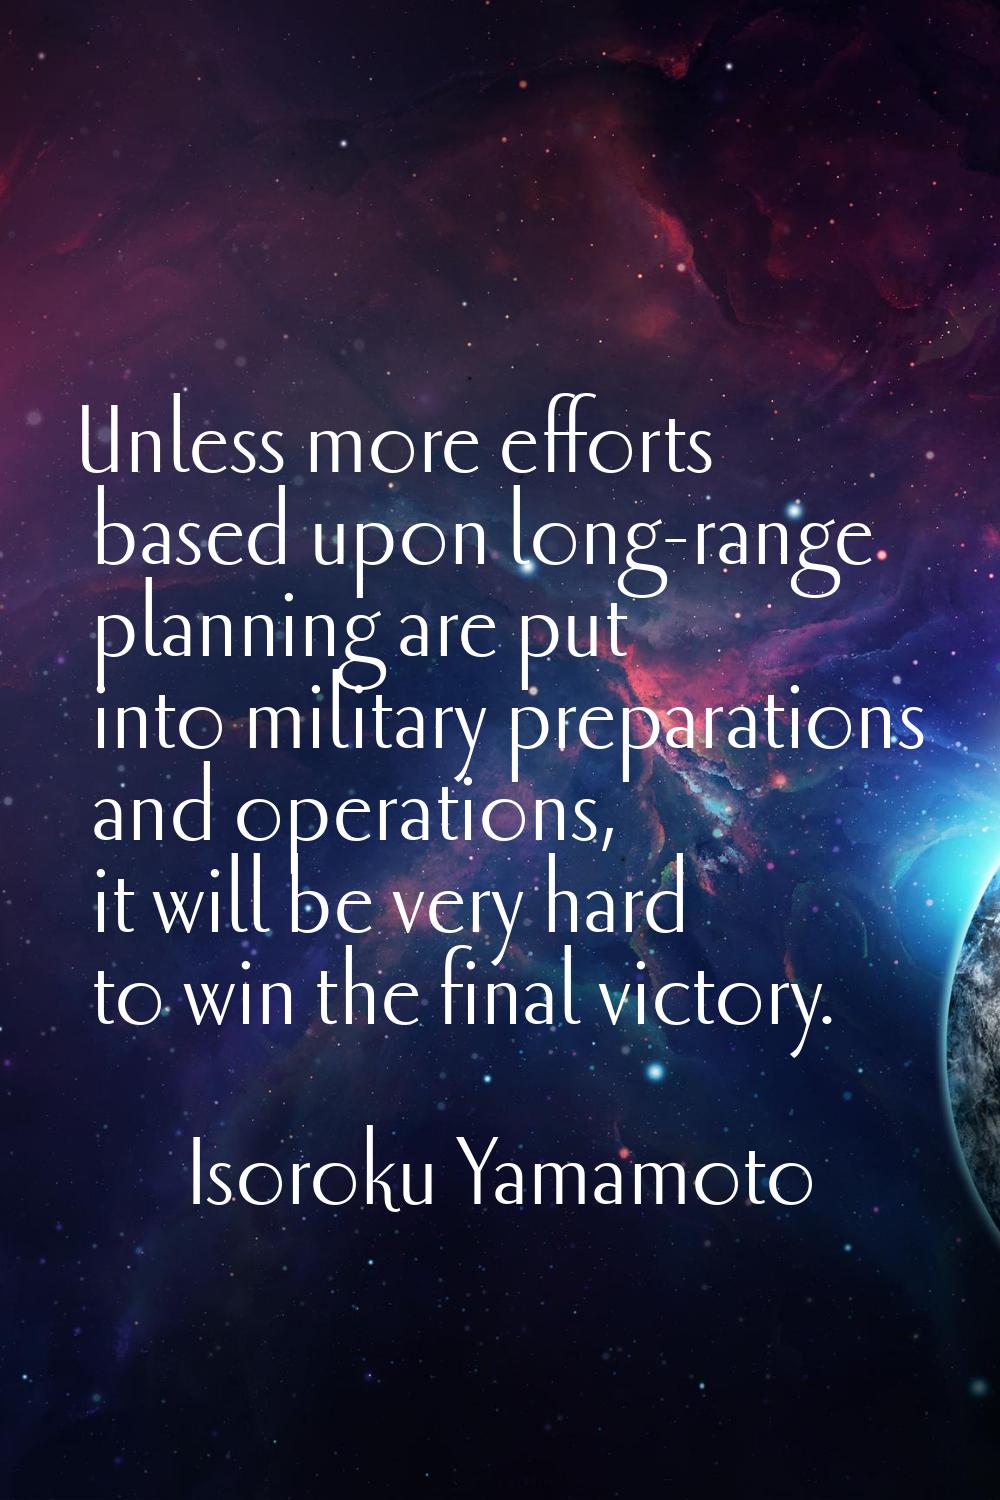 Unless more efforts based upon long-range planning are put into military preparations and operation